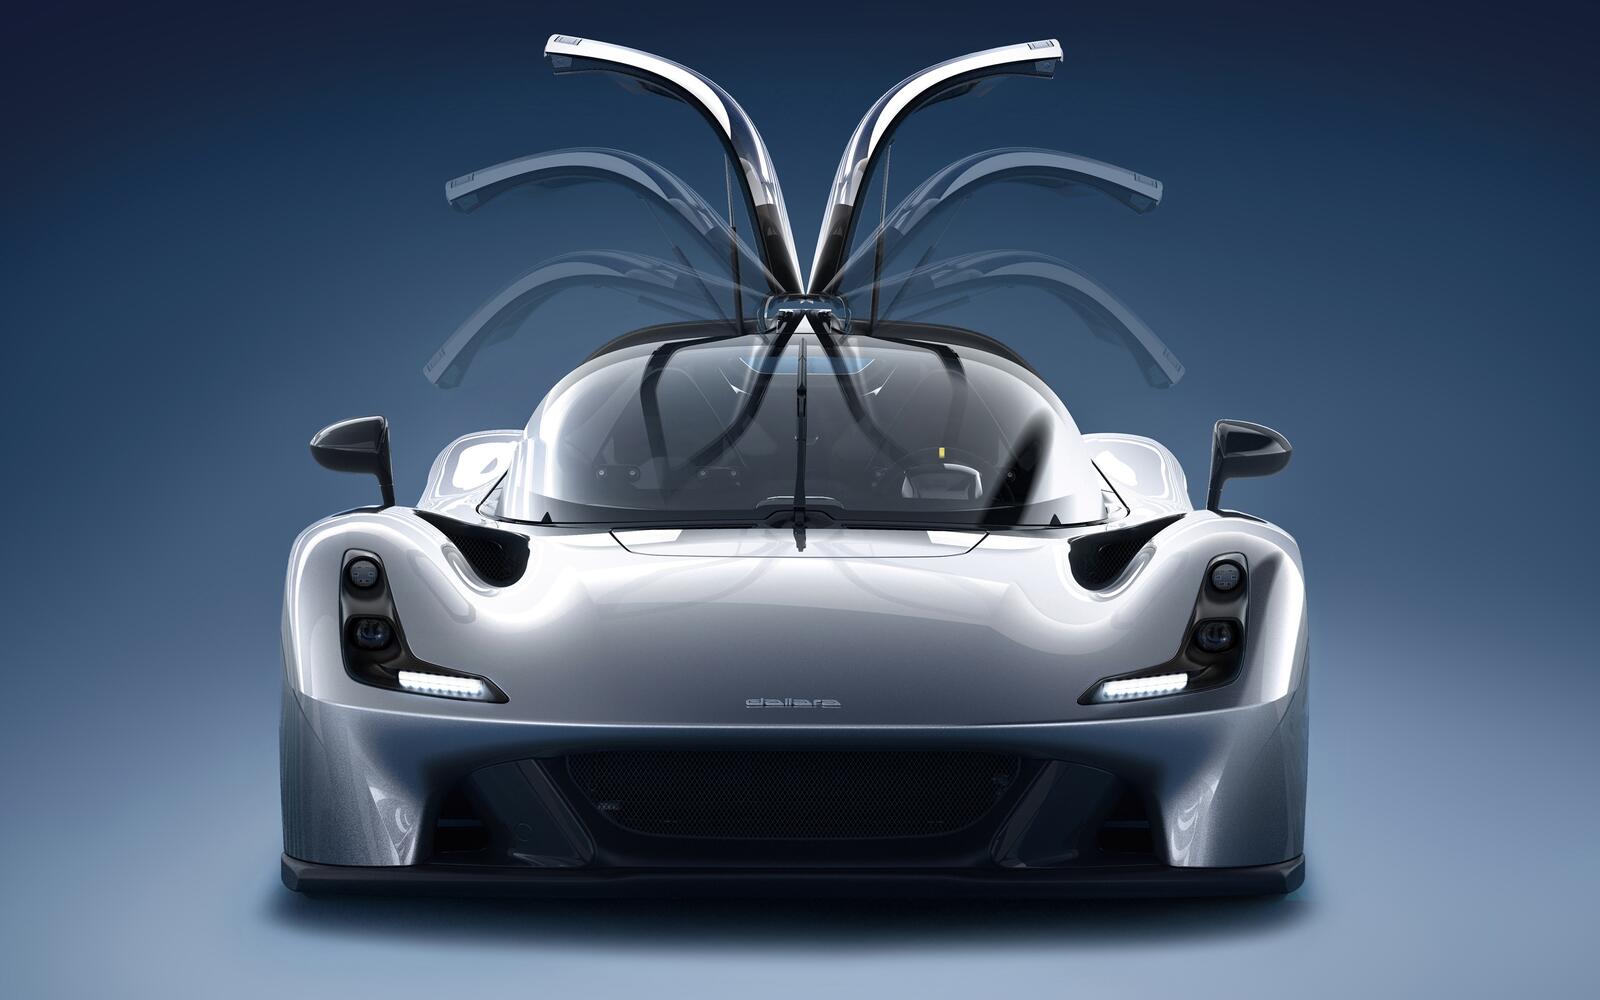 Wallpapers Dallara Stradale cars front view on the desktop